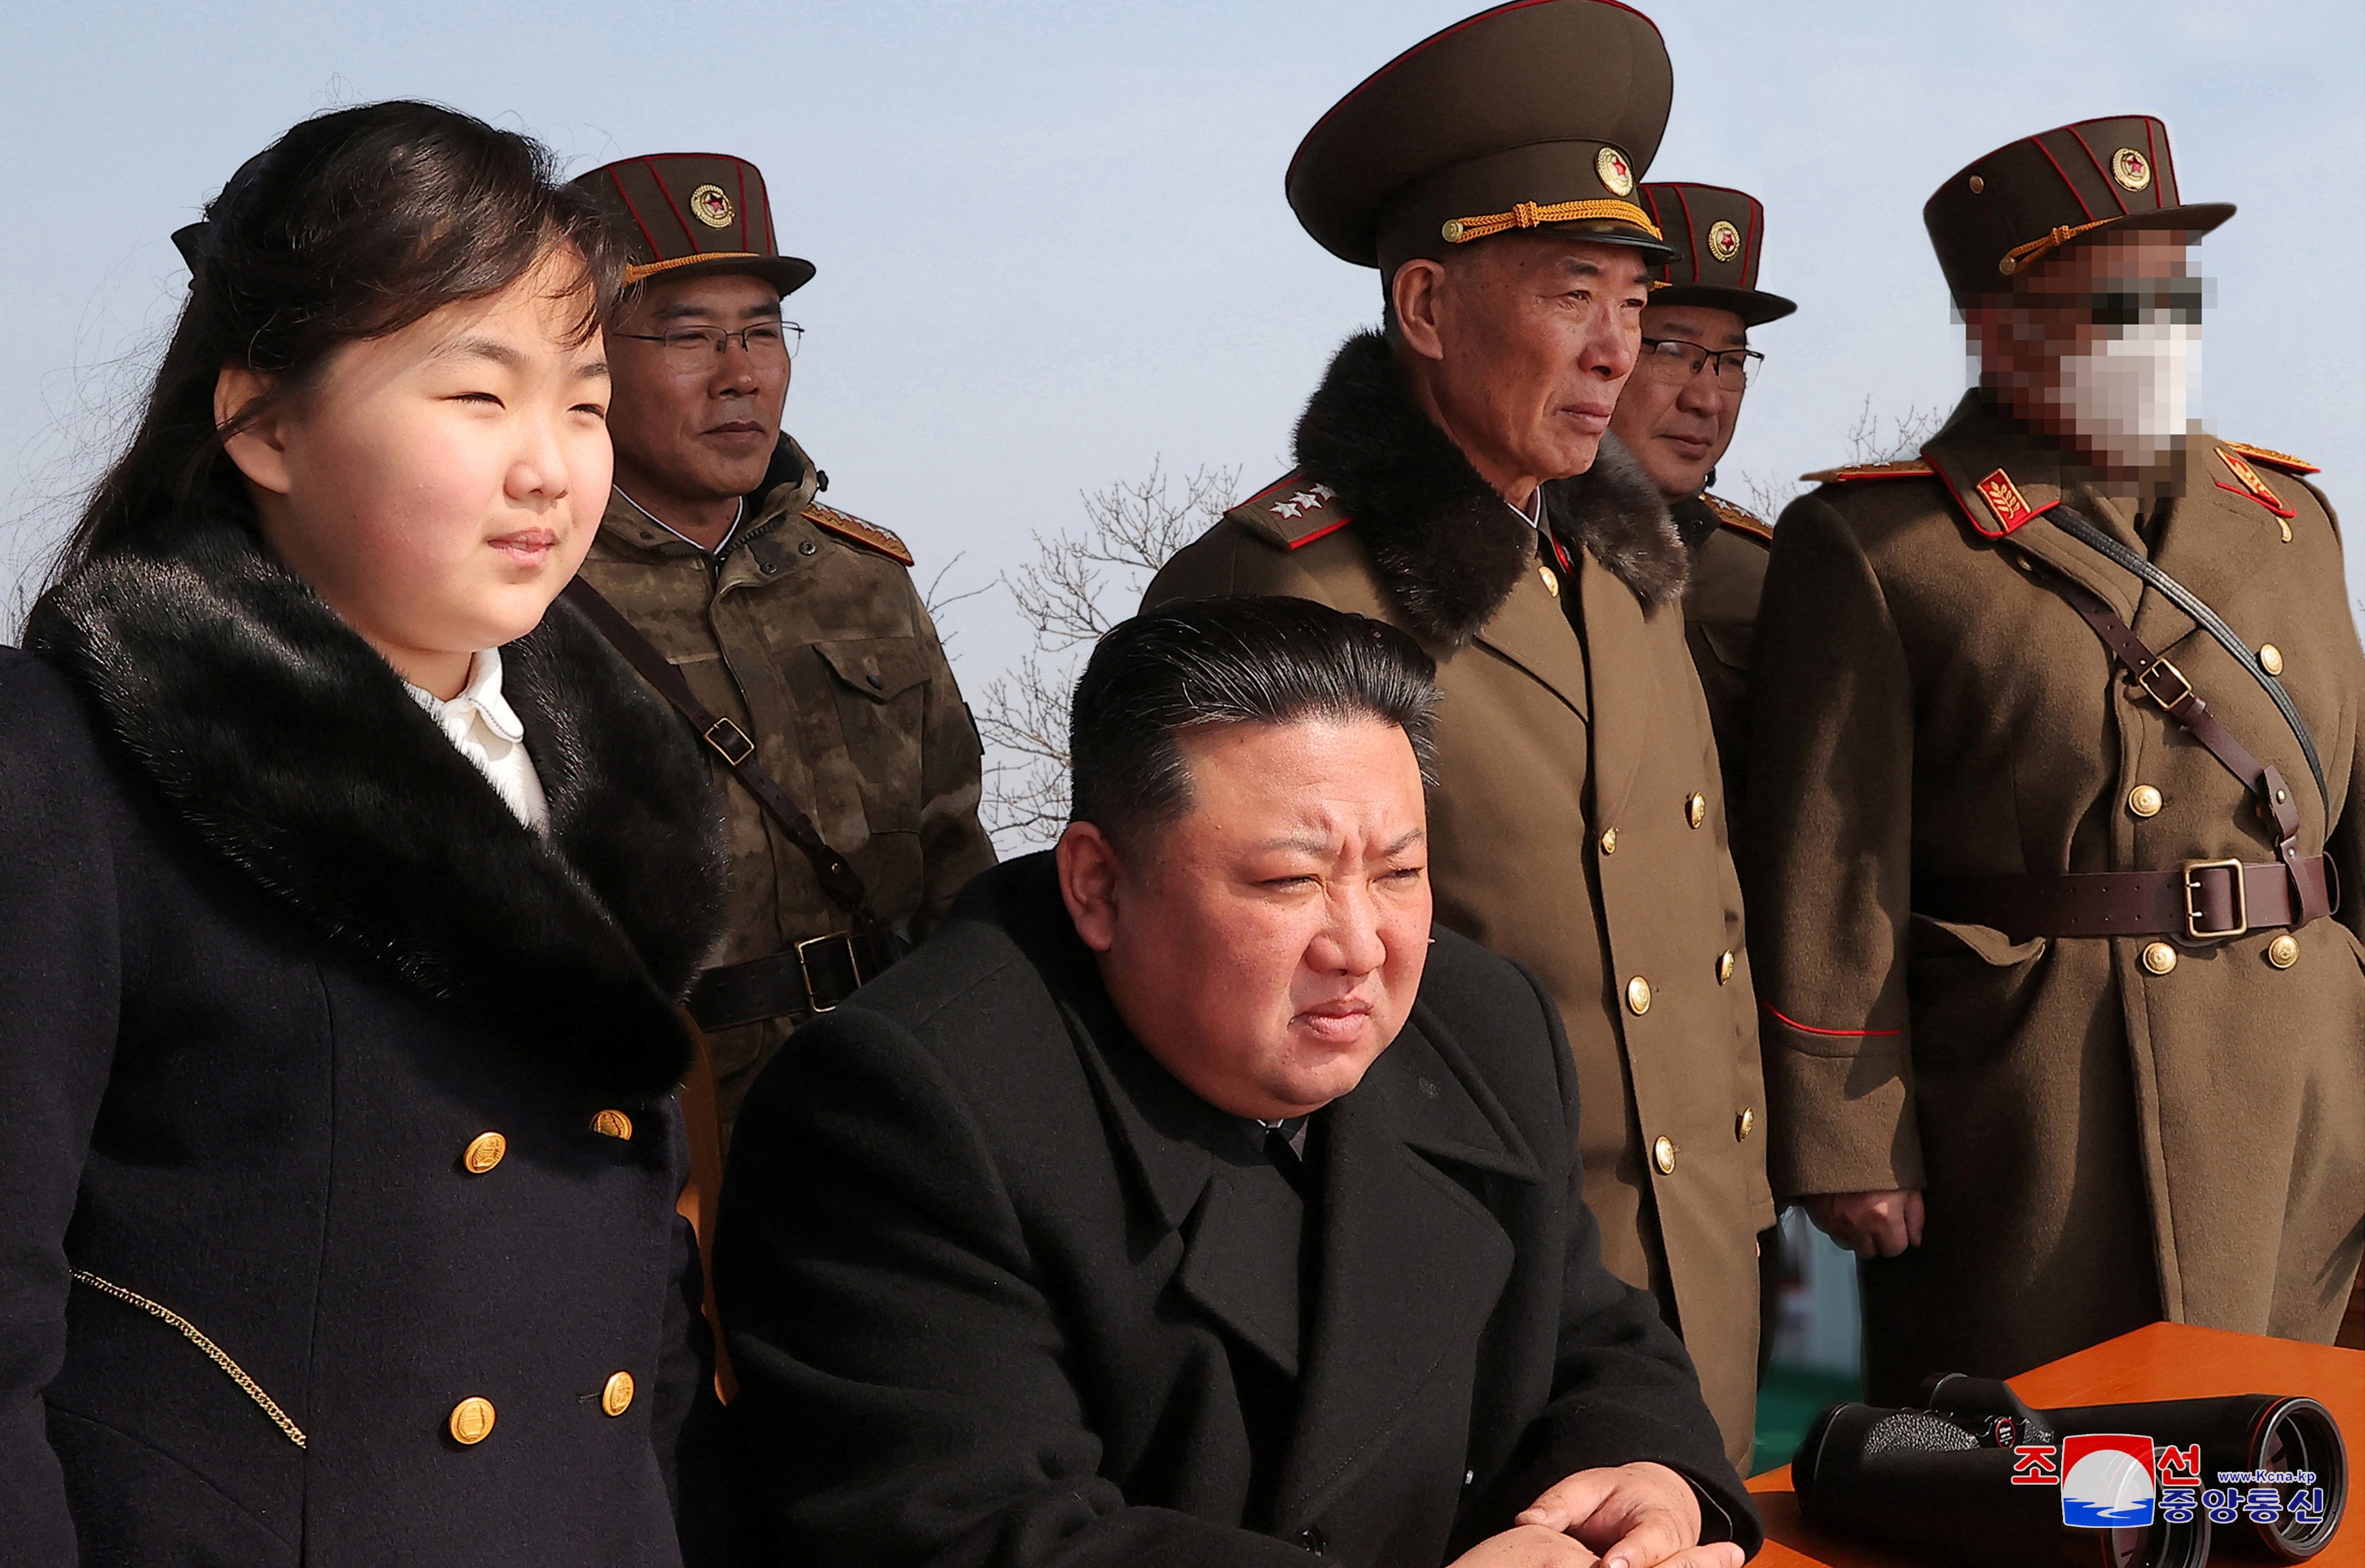 Kim Jong-un and his daughter Kim Ju-ae watch a missile drill at an undisclosed location in this image released by North Korea’s Central News Agency on 20 March